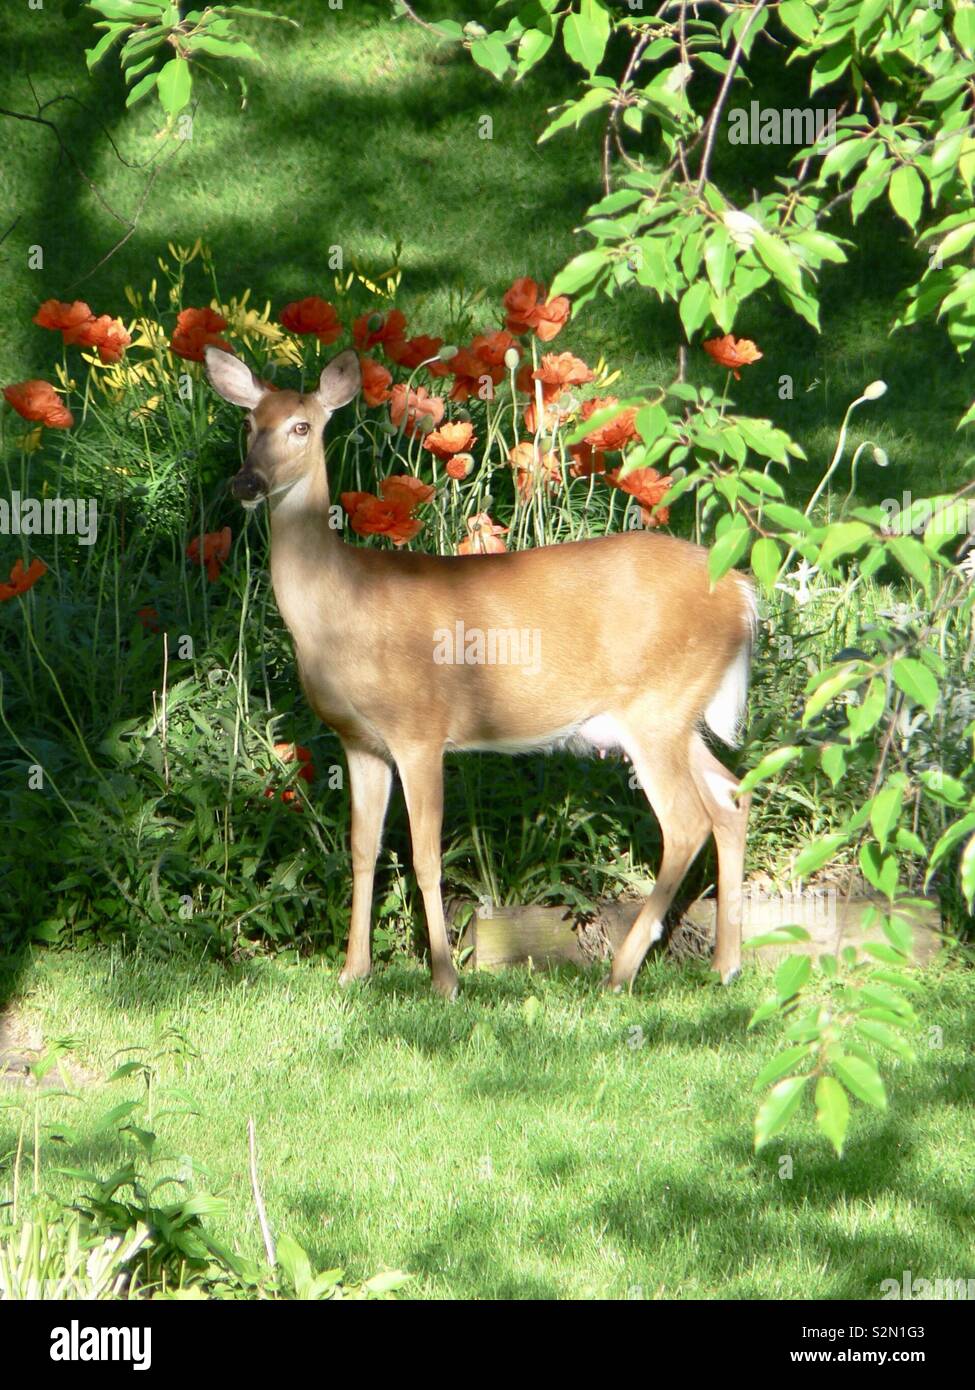 Mama doe at the edge of my poppy garden keenly eyeing the situation. Surrounded by lush grass, trees, and garden. Stock Photo